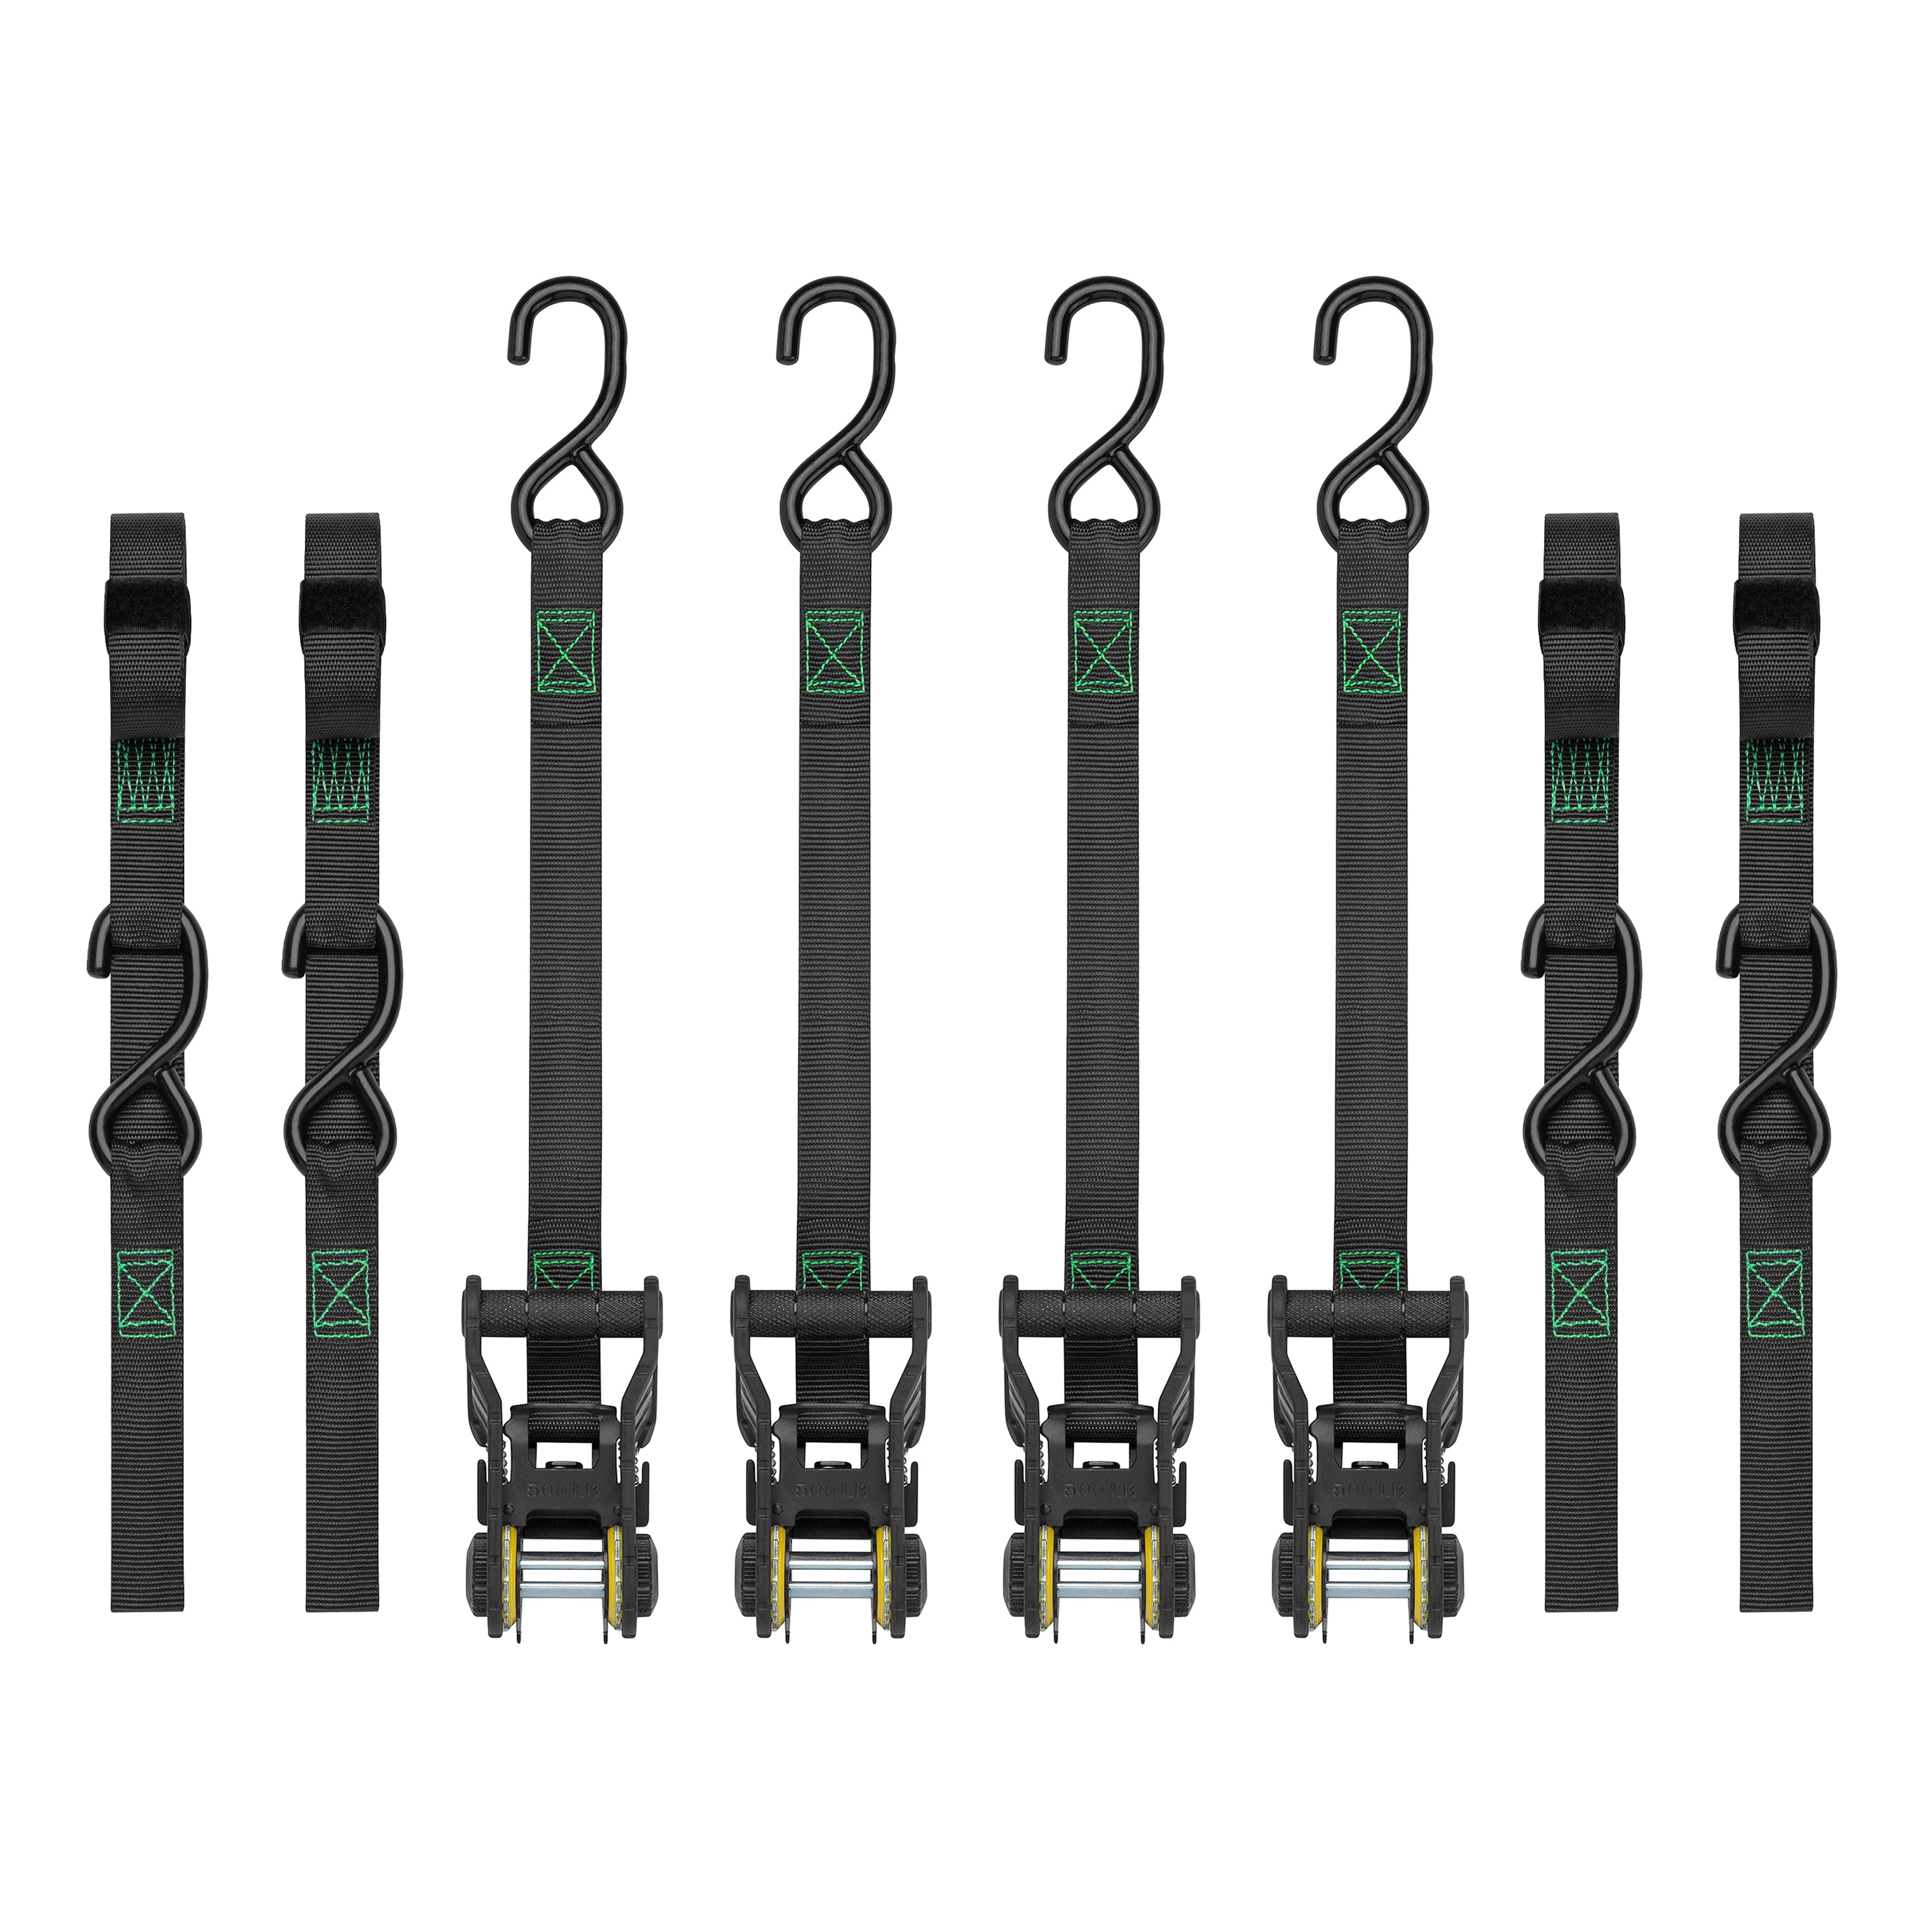 Tactical Ratchet Tie Down Tie Downs at